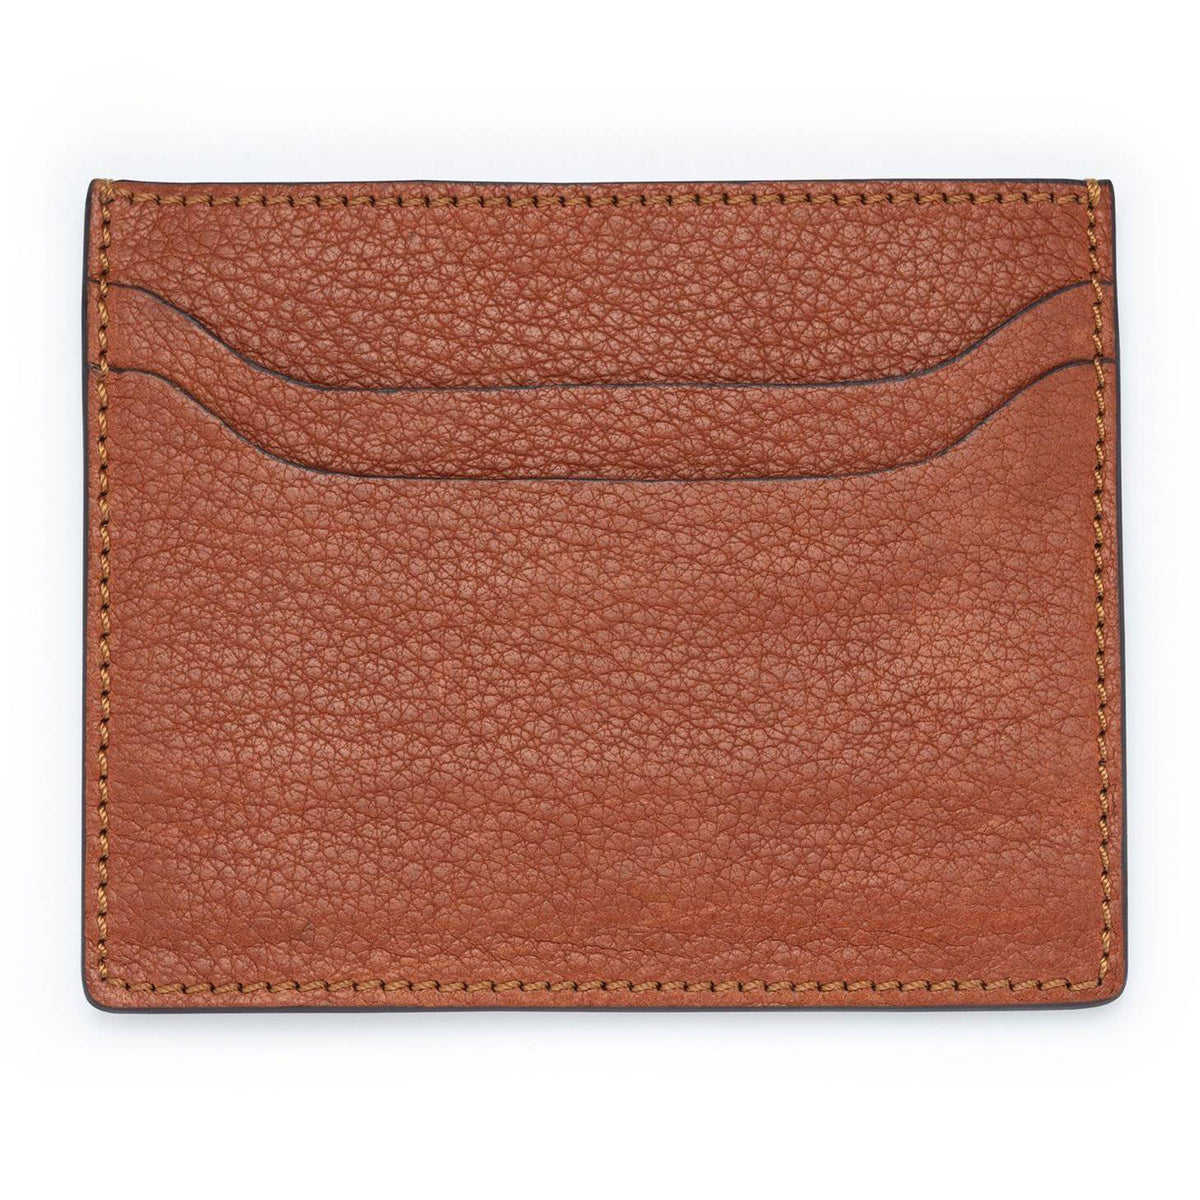 Hand-sewn card case made from genuine certified organic leather